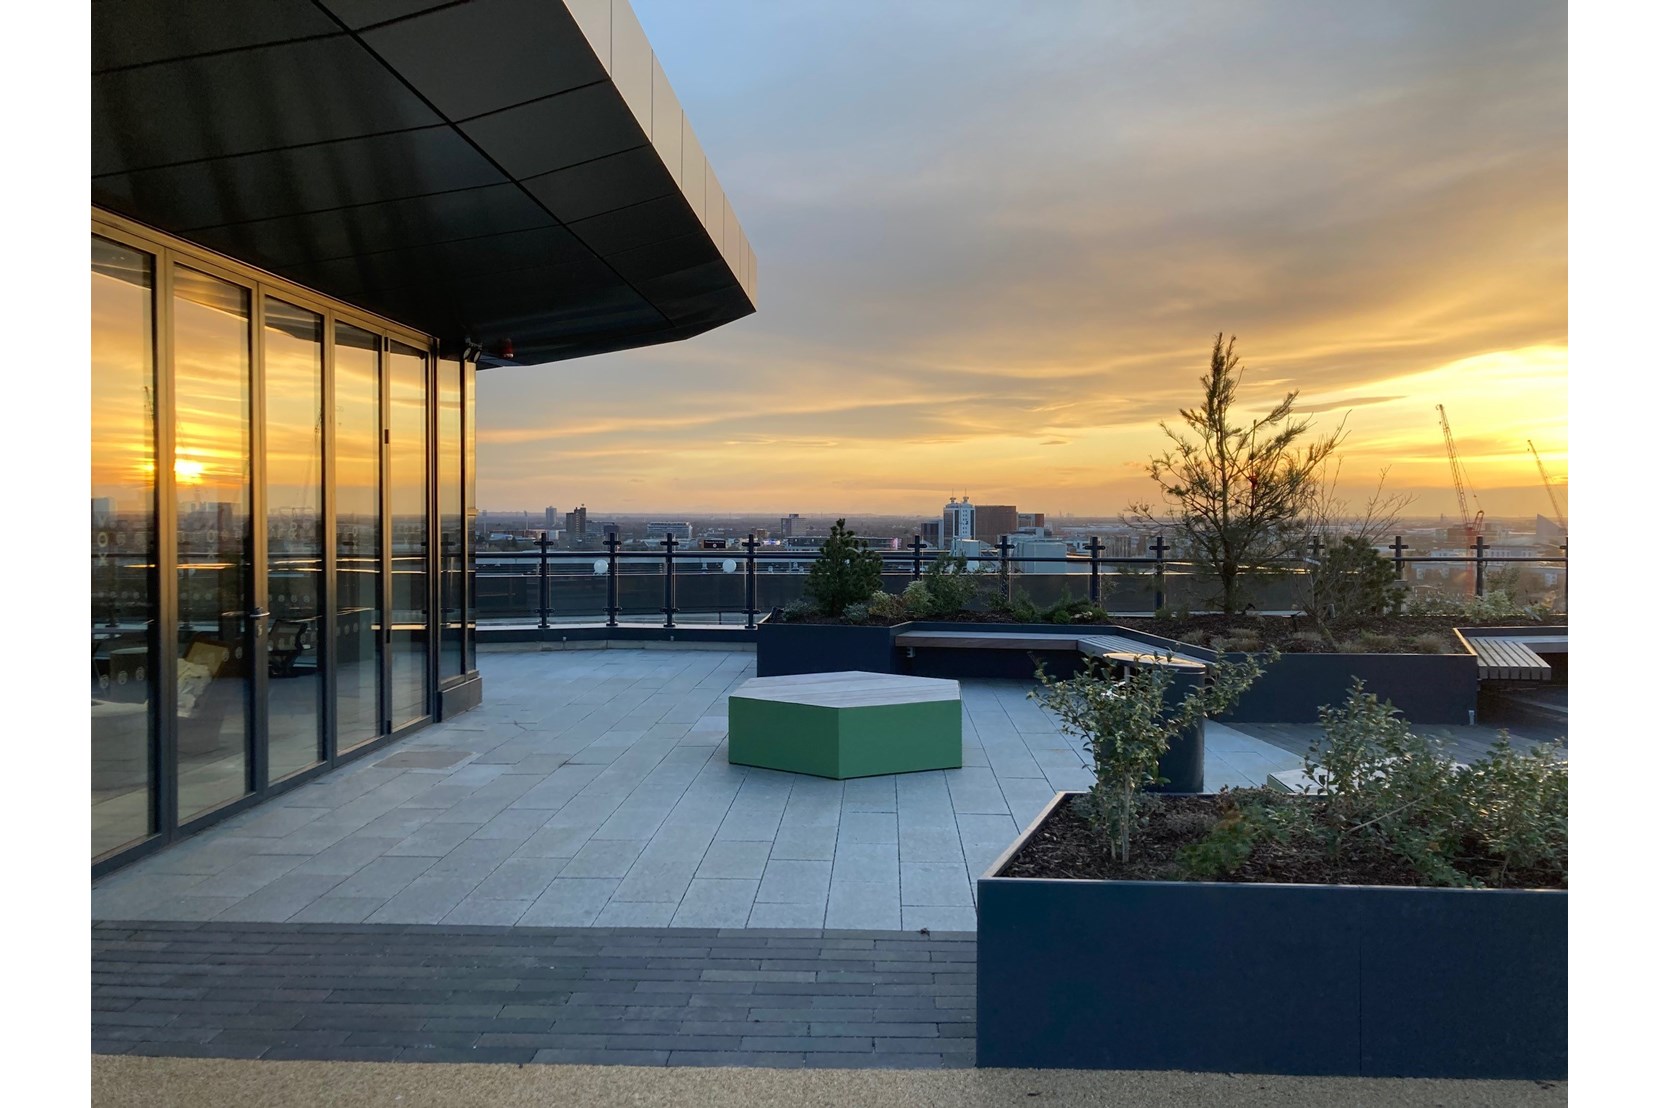 Apartments to Rent by Allsop at Vox, Manchester, M15, roof terrace dusk view